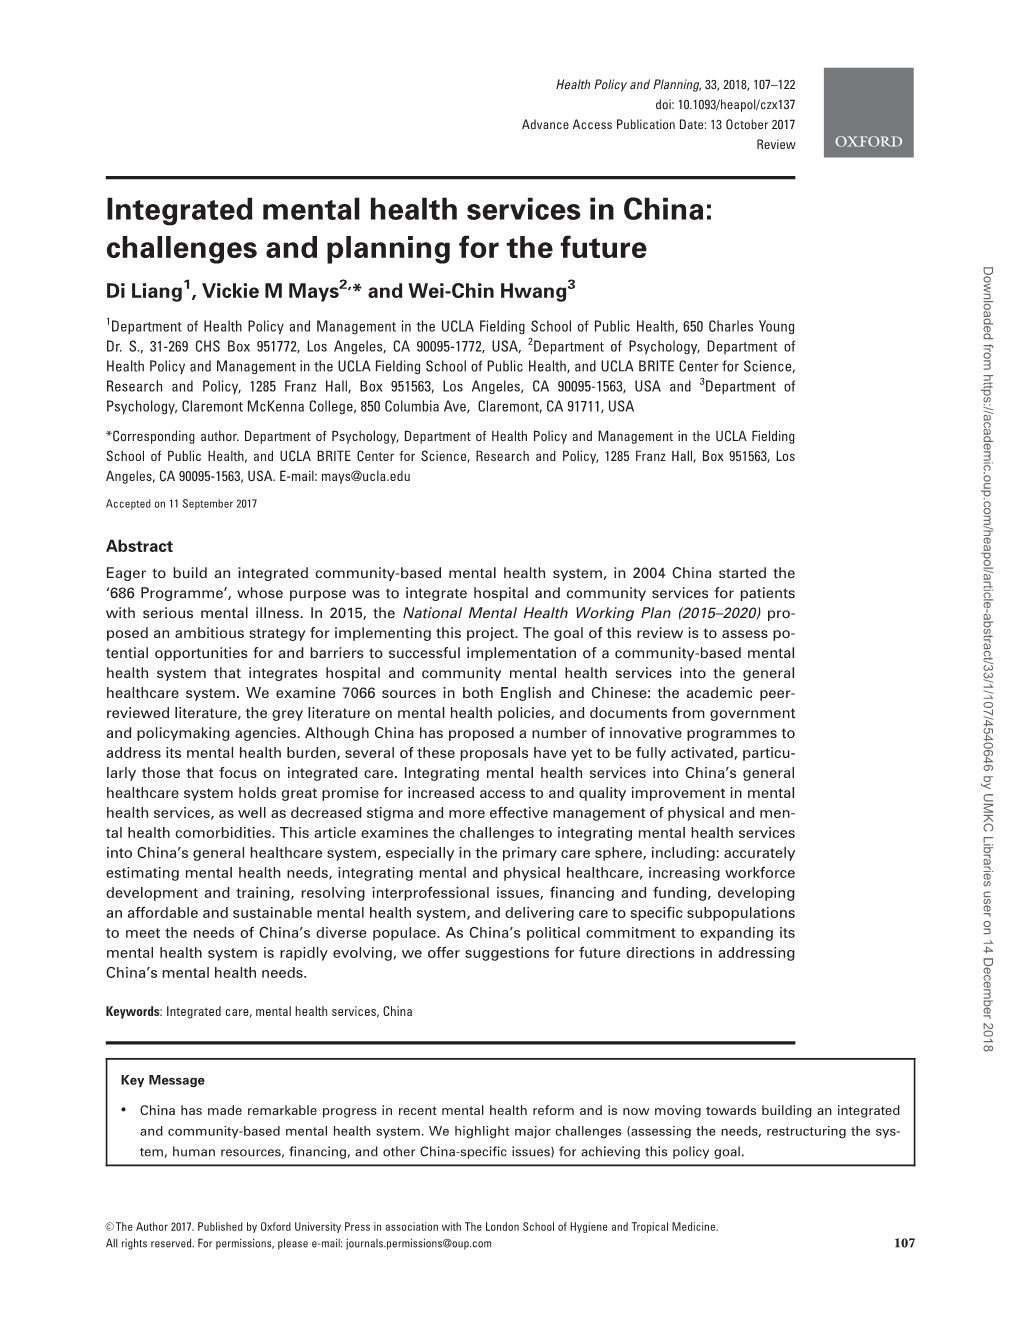 Integrated Mental Health Services in China: Challenges and Planning For